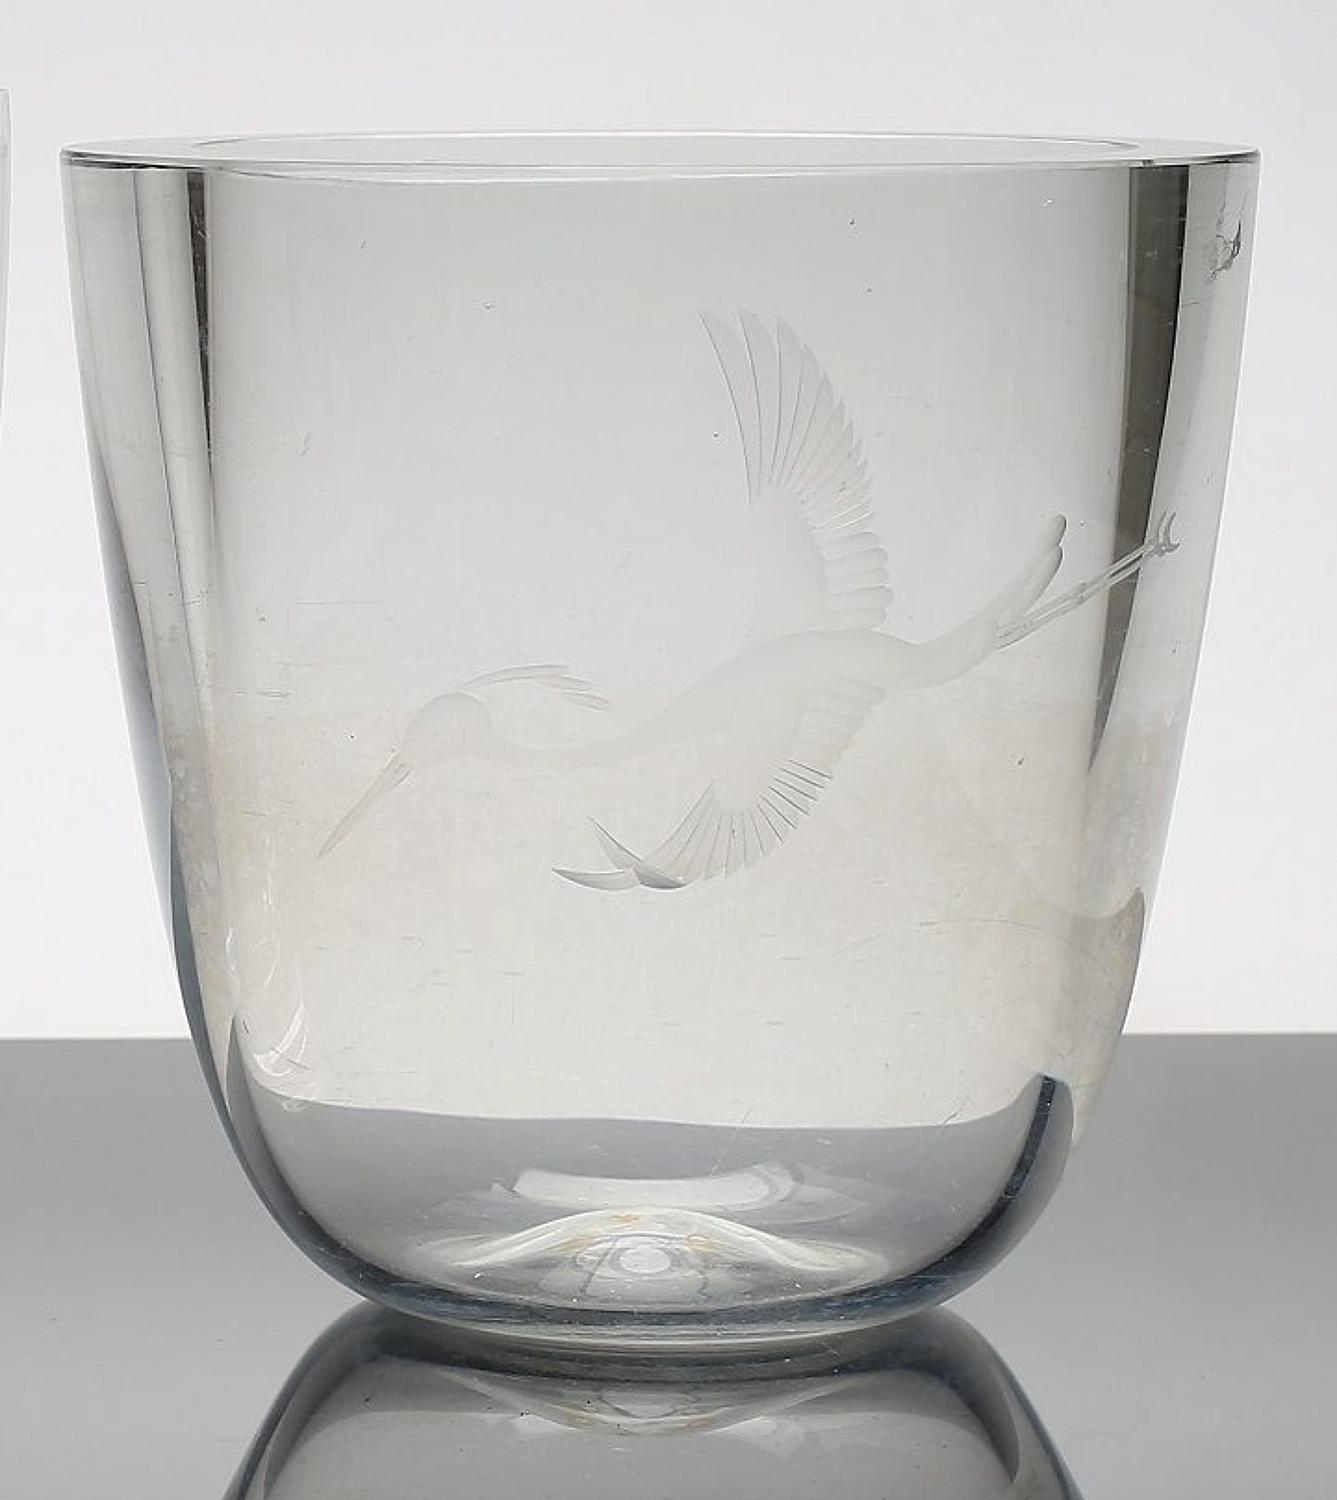 A thick-walled glass vase with engraving, Swedish 19